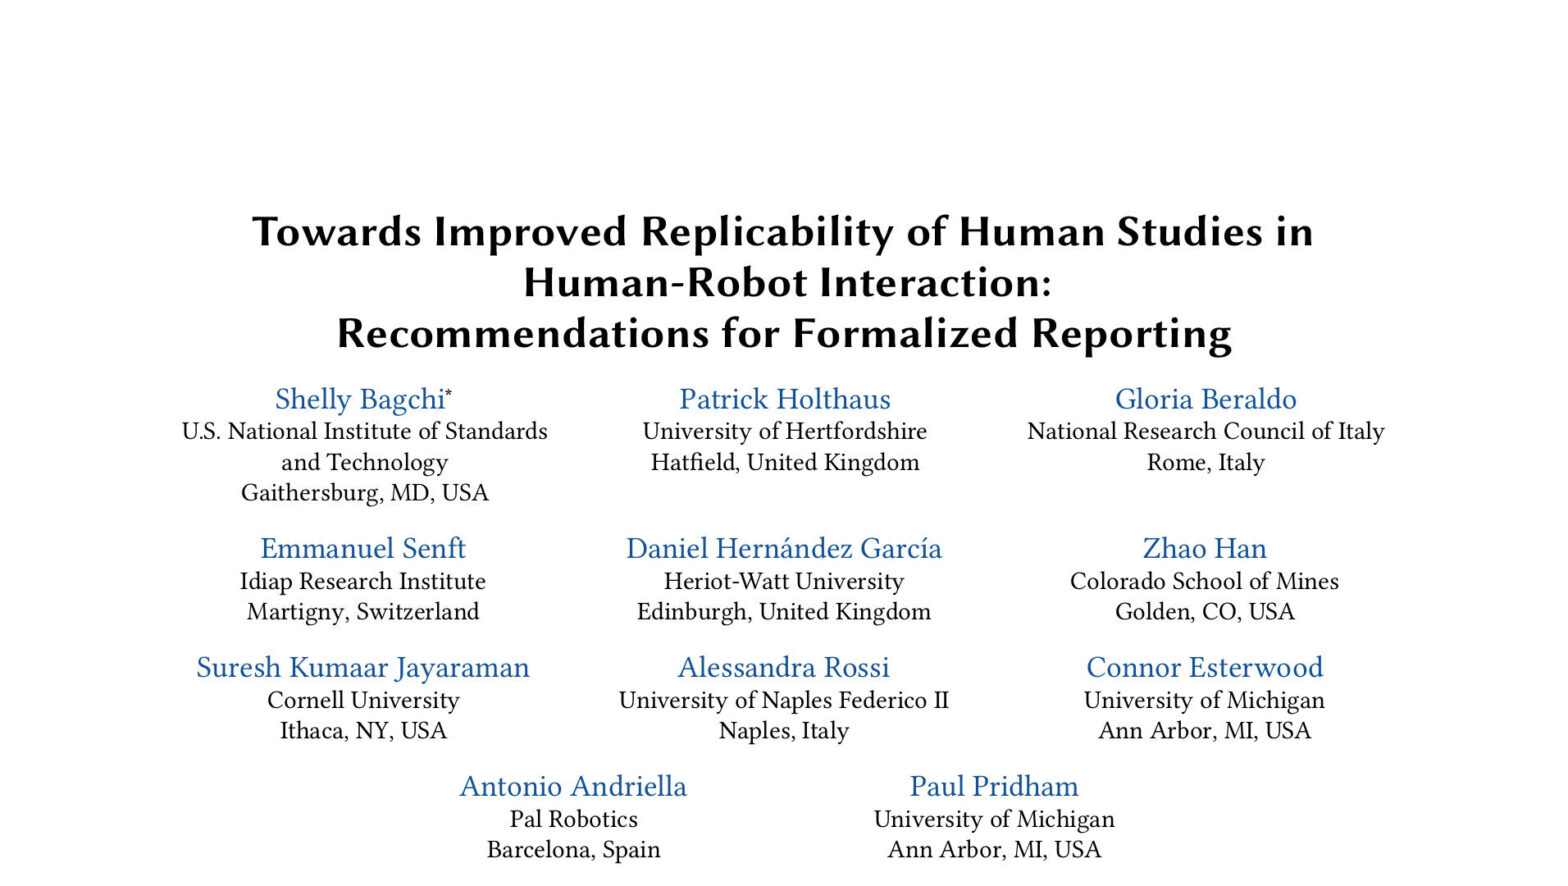 Towards Improved Replicability of Human Studies in Human Robot Interaction Recommendations for Formalized Reporting